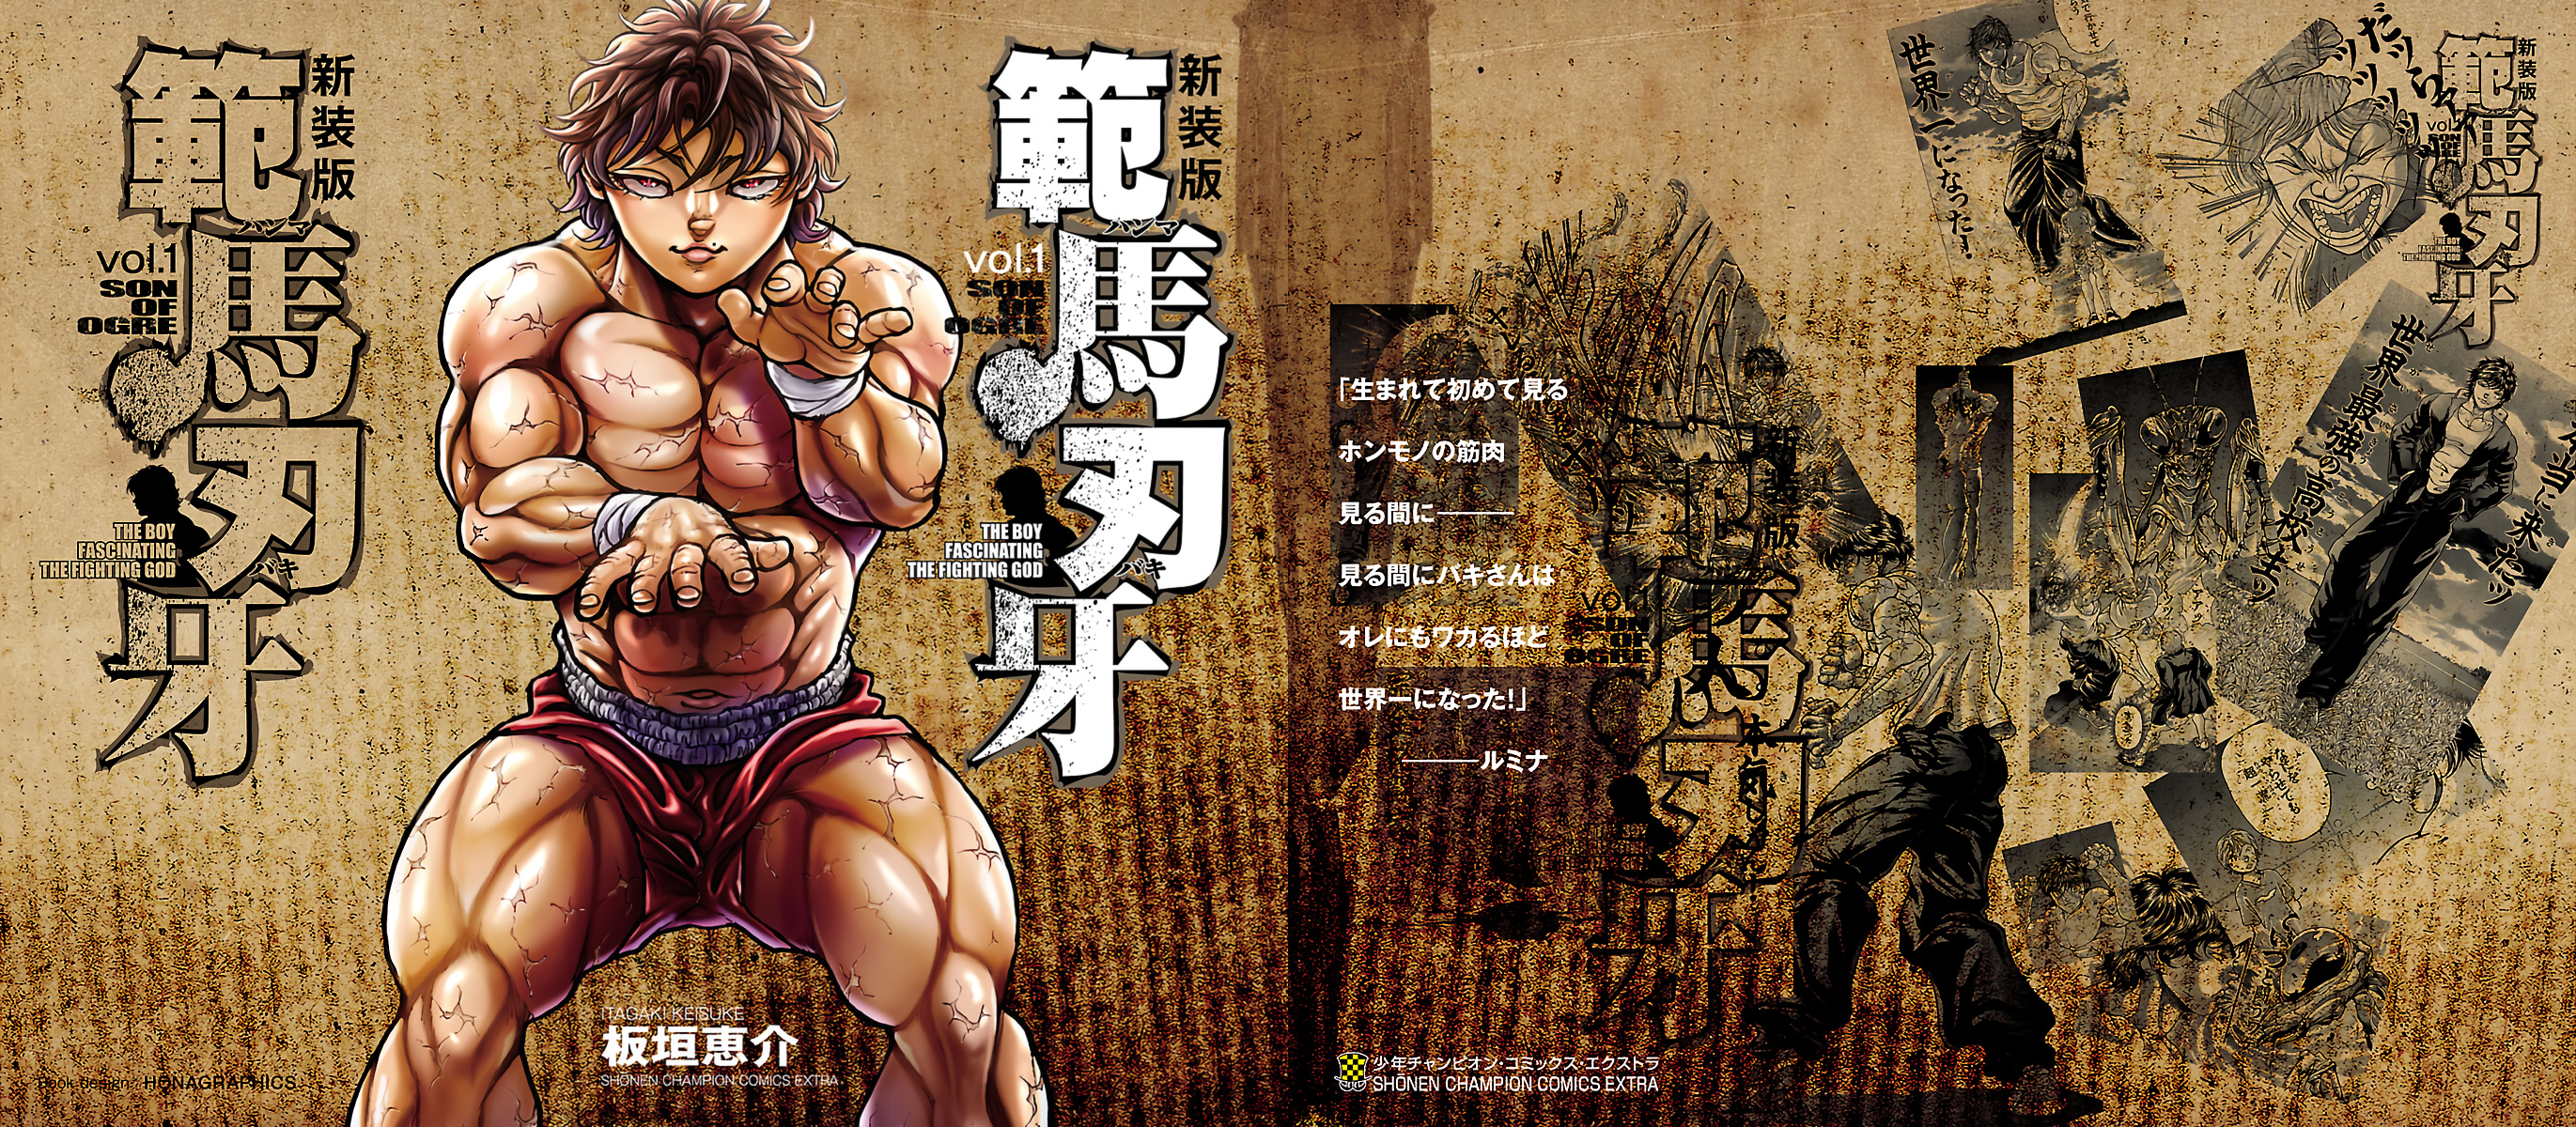 Hanma Baki - Son Of Ogre (Shinsoban Release) Vol.1 Chapter 1: Bloodline Of Fighting Gods - Picture 3